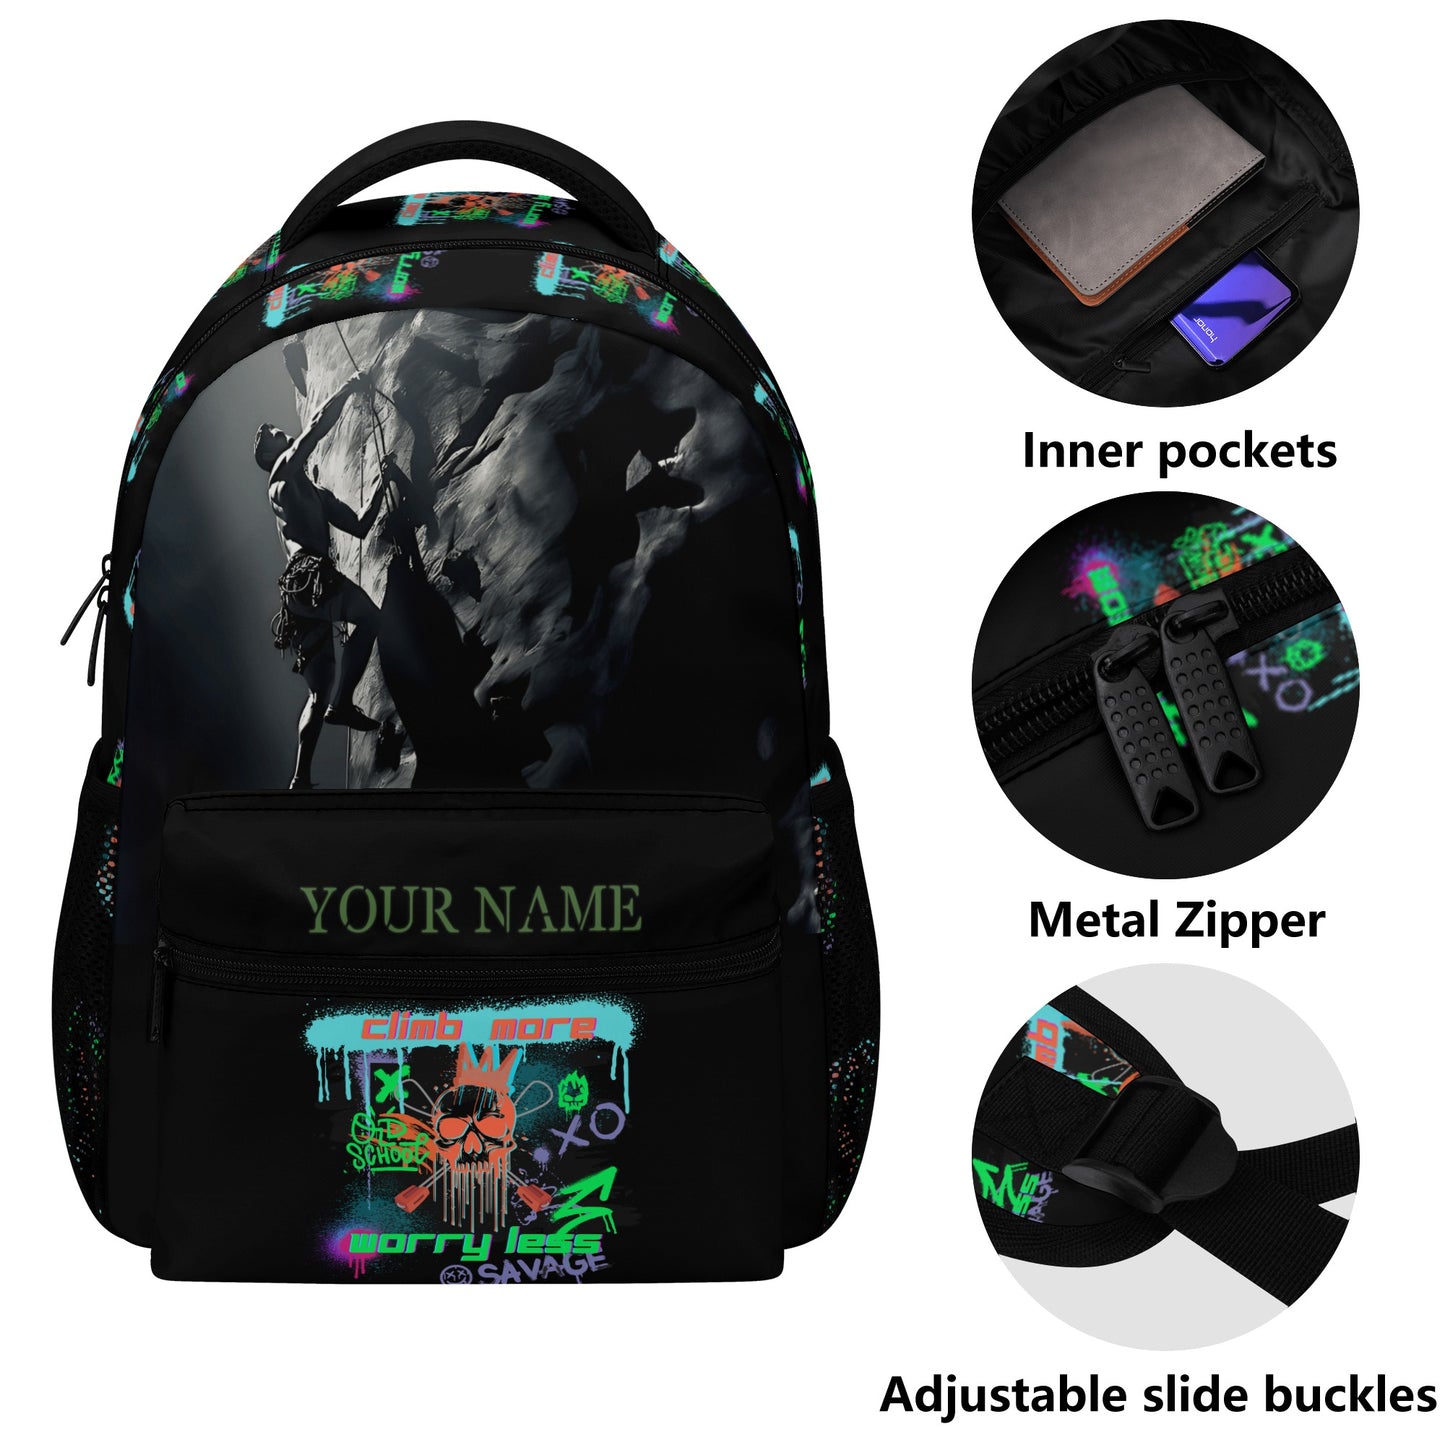 Adventure-Ready Backpack